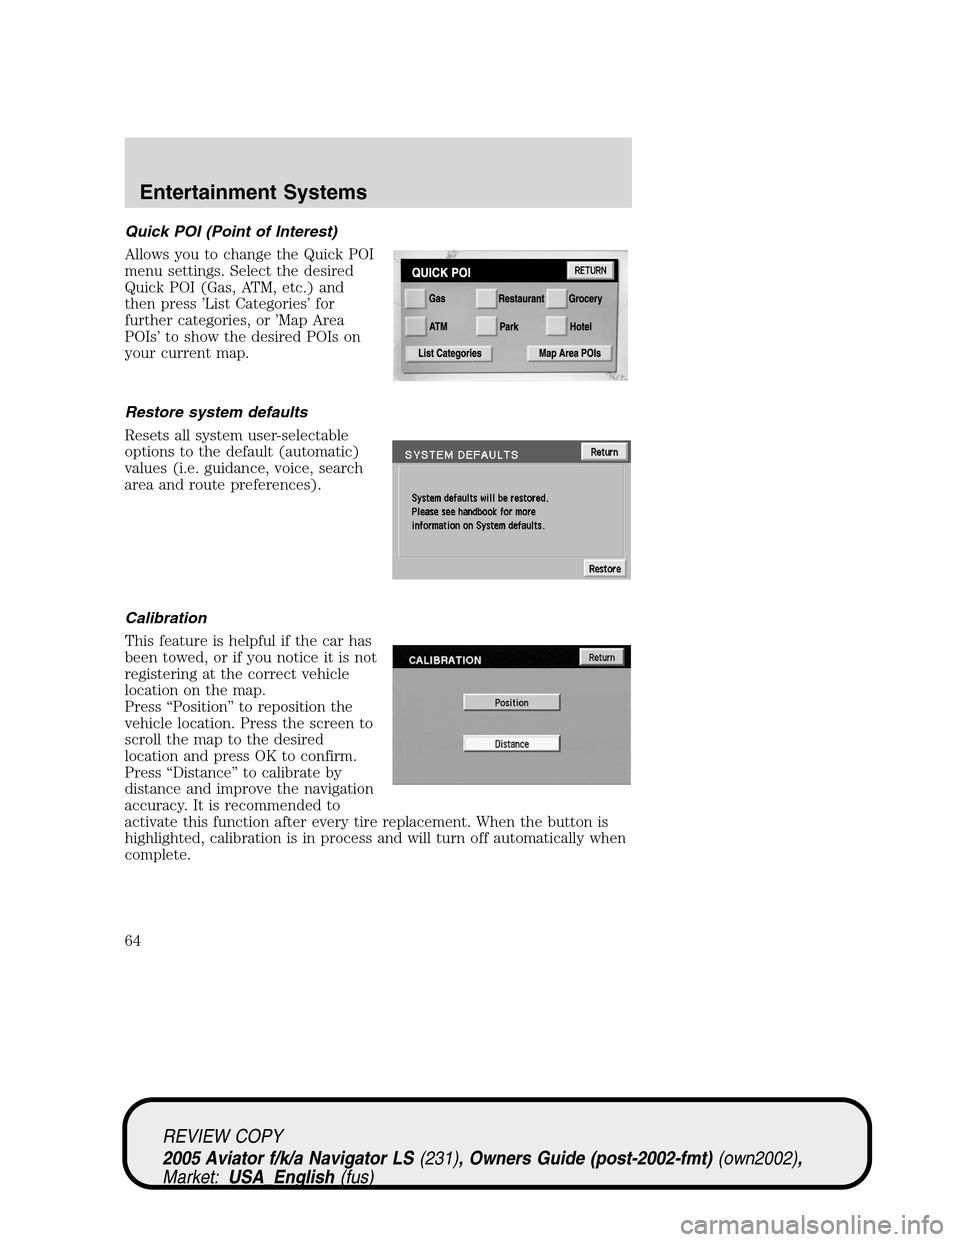 LINCOLN AVIATOR 2005  Owners Manual Quick POI (Point of Interest)
Allows you to change the Quick POI
menu settings. Select the desired
Quick POI (Gas, ATM, etc.) and
then press’List Categories’for
further categories, or’Map Area
P